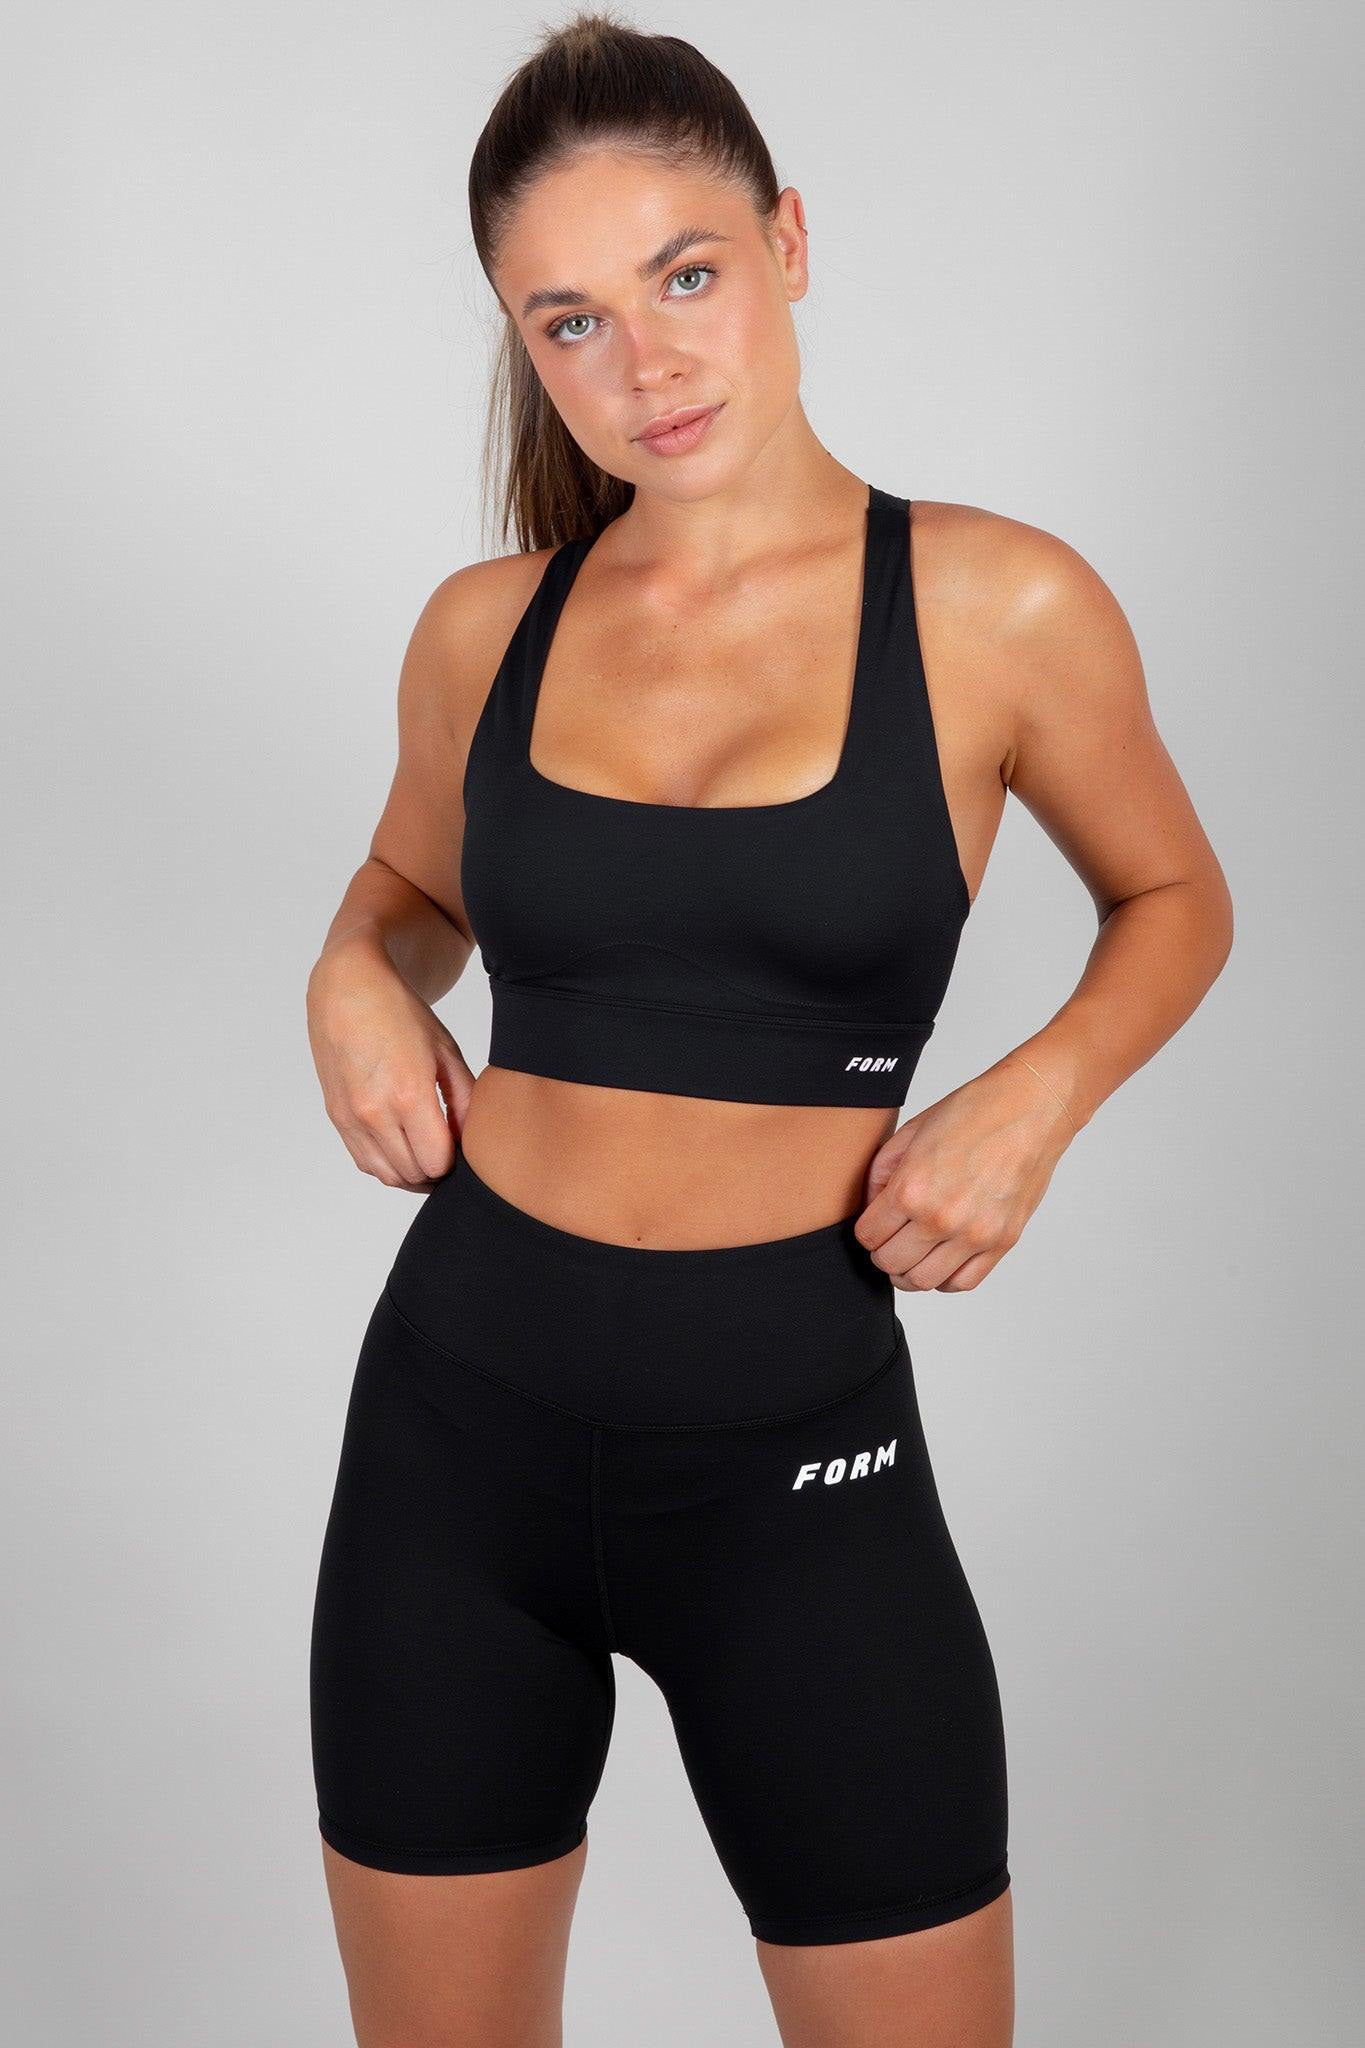 ALL ACTIVEWEAR